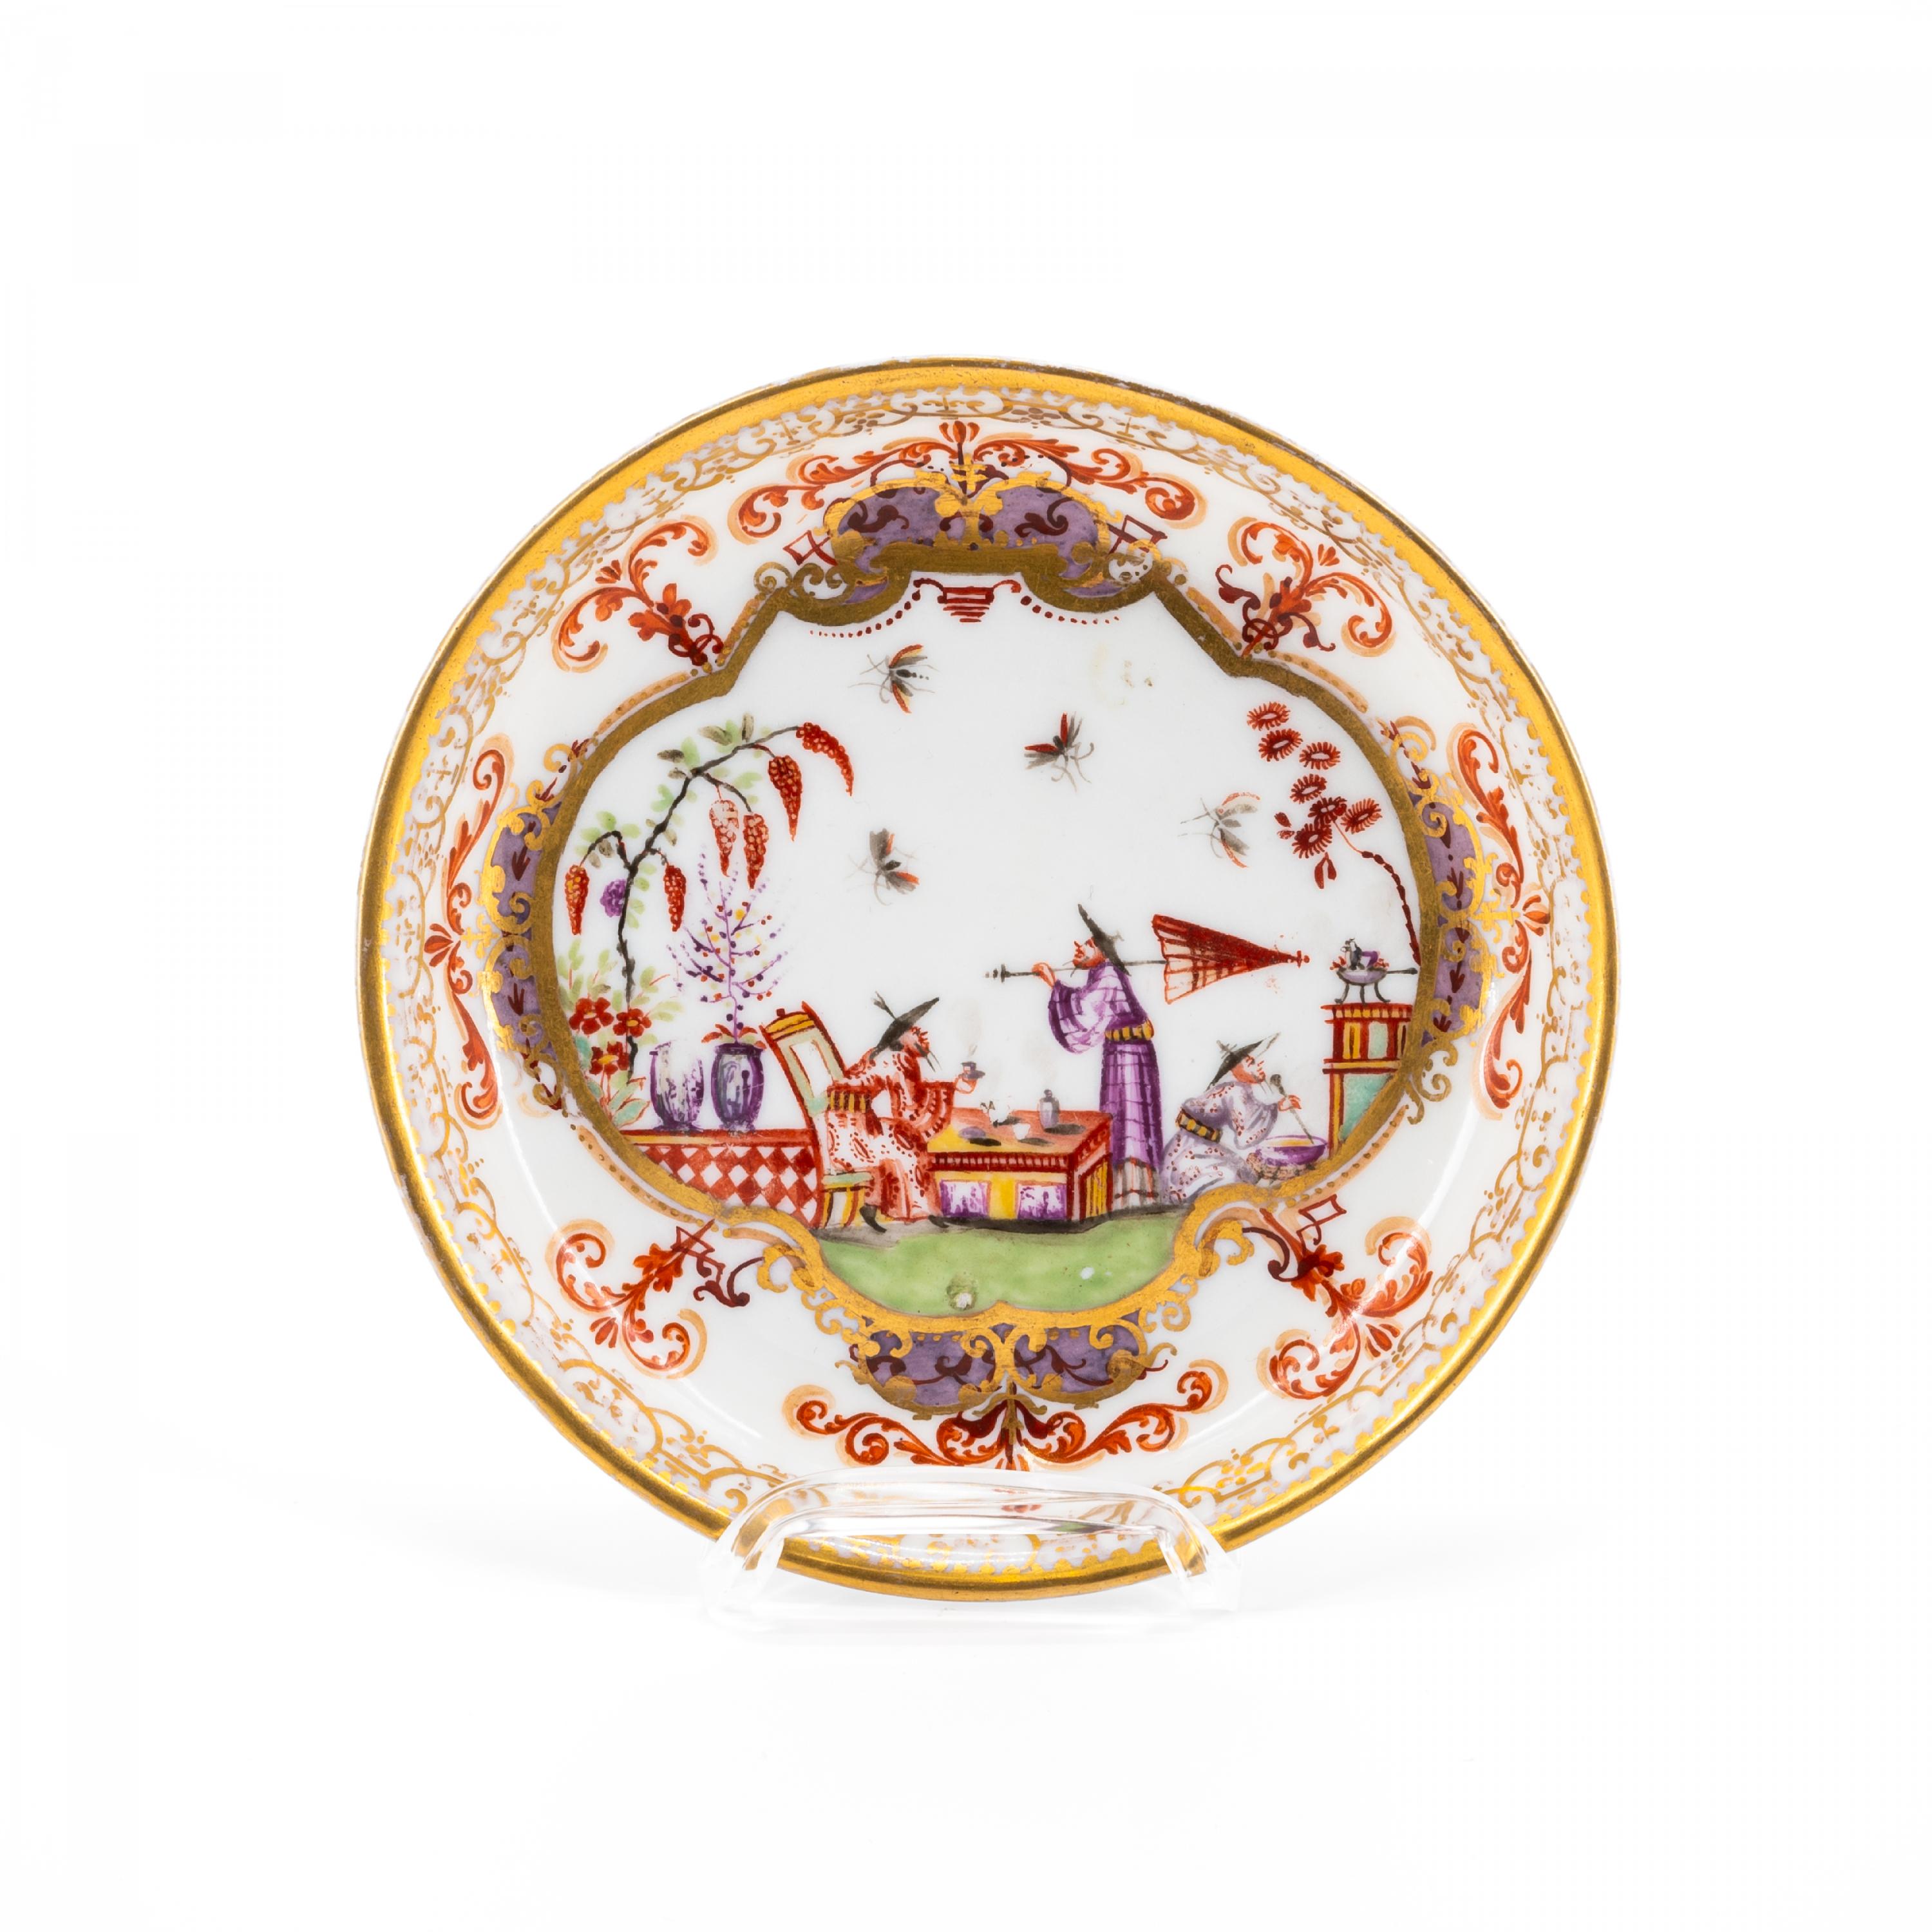 SMALL PORCELAIN SAUCER WITH CHINOISERIES - Image 2 of 3